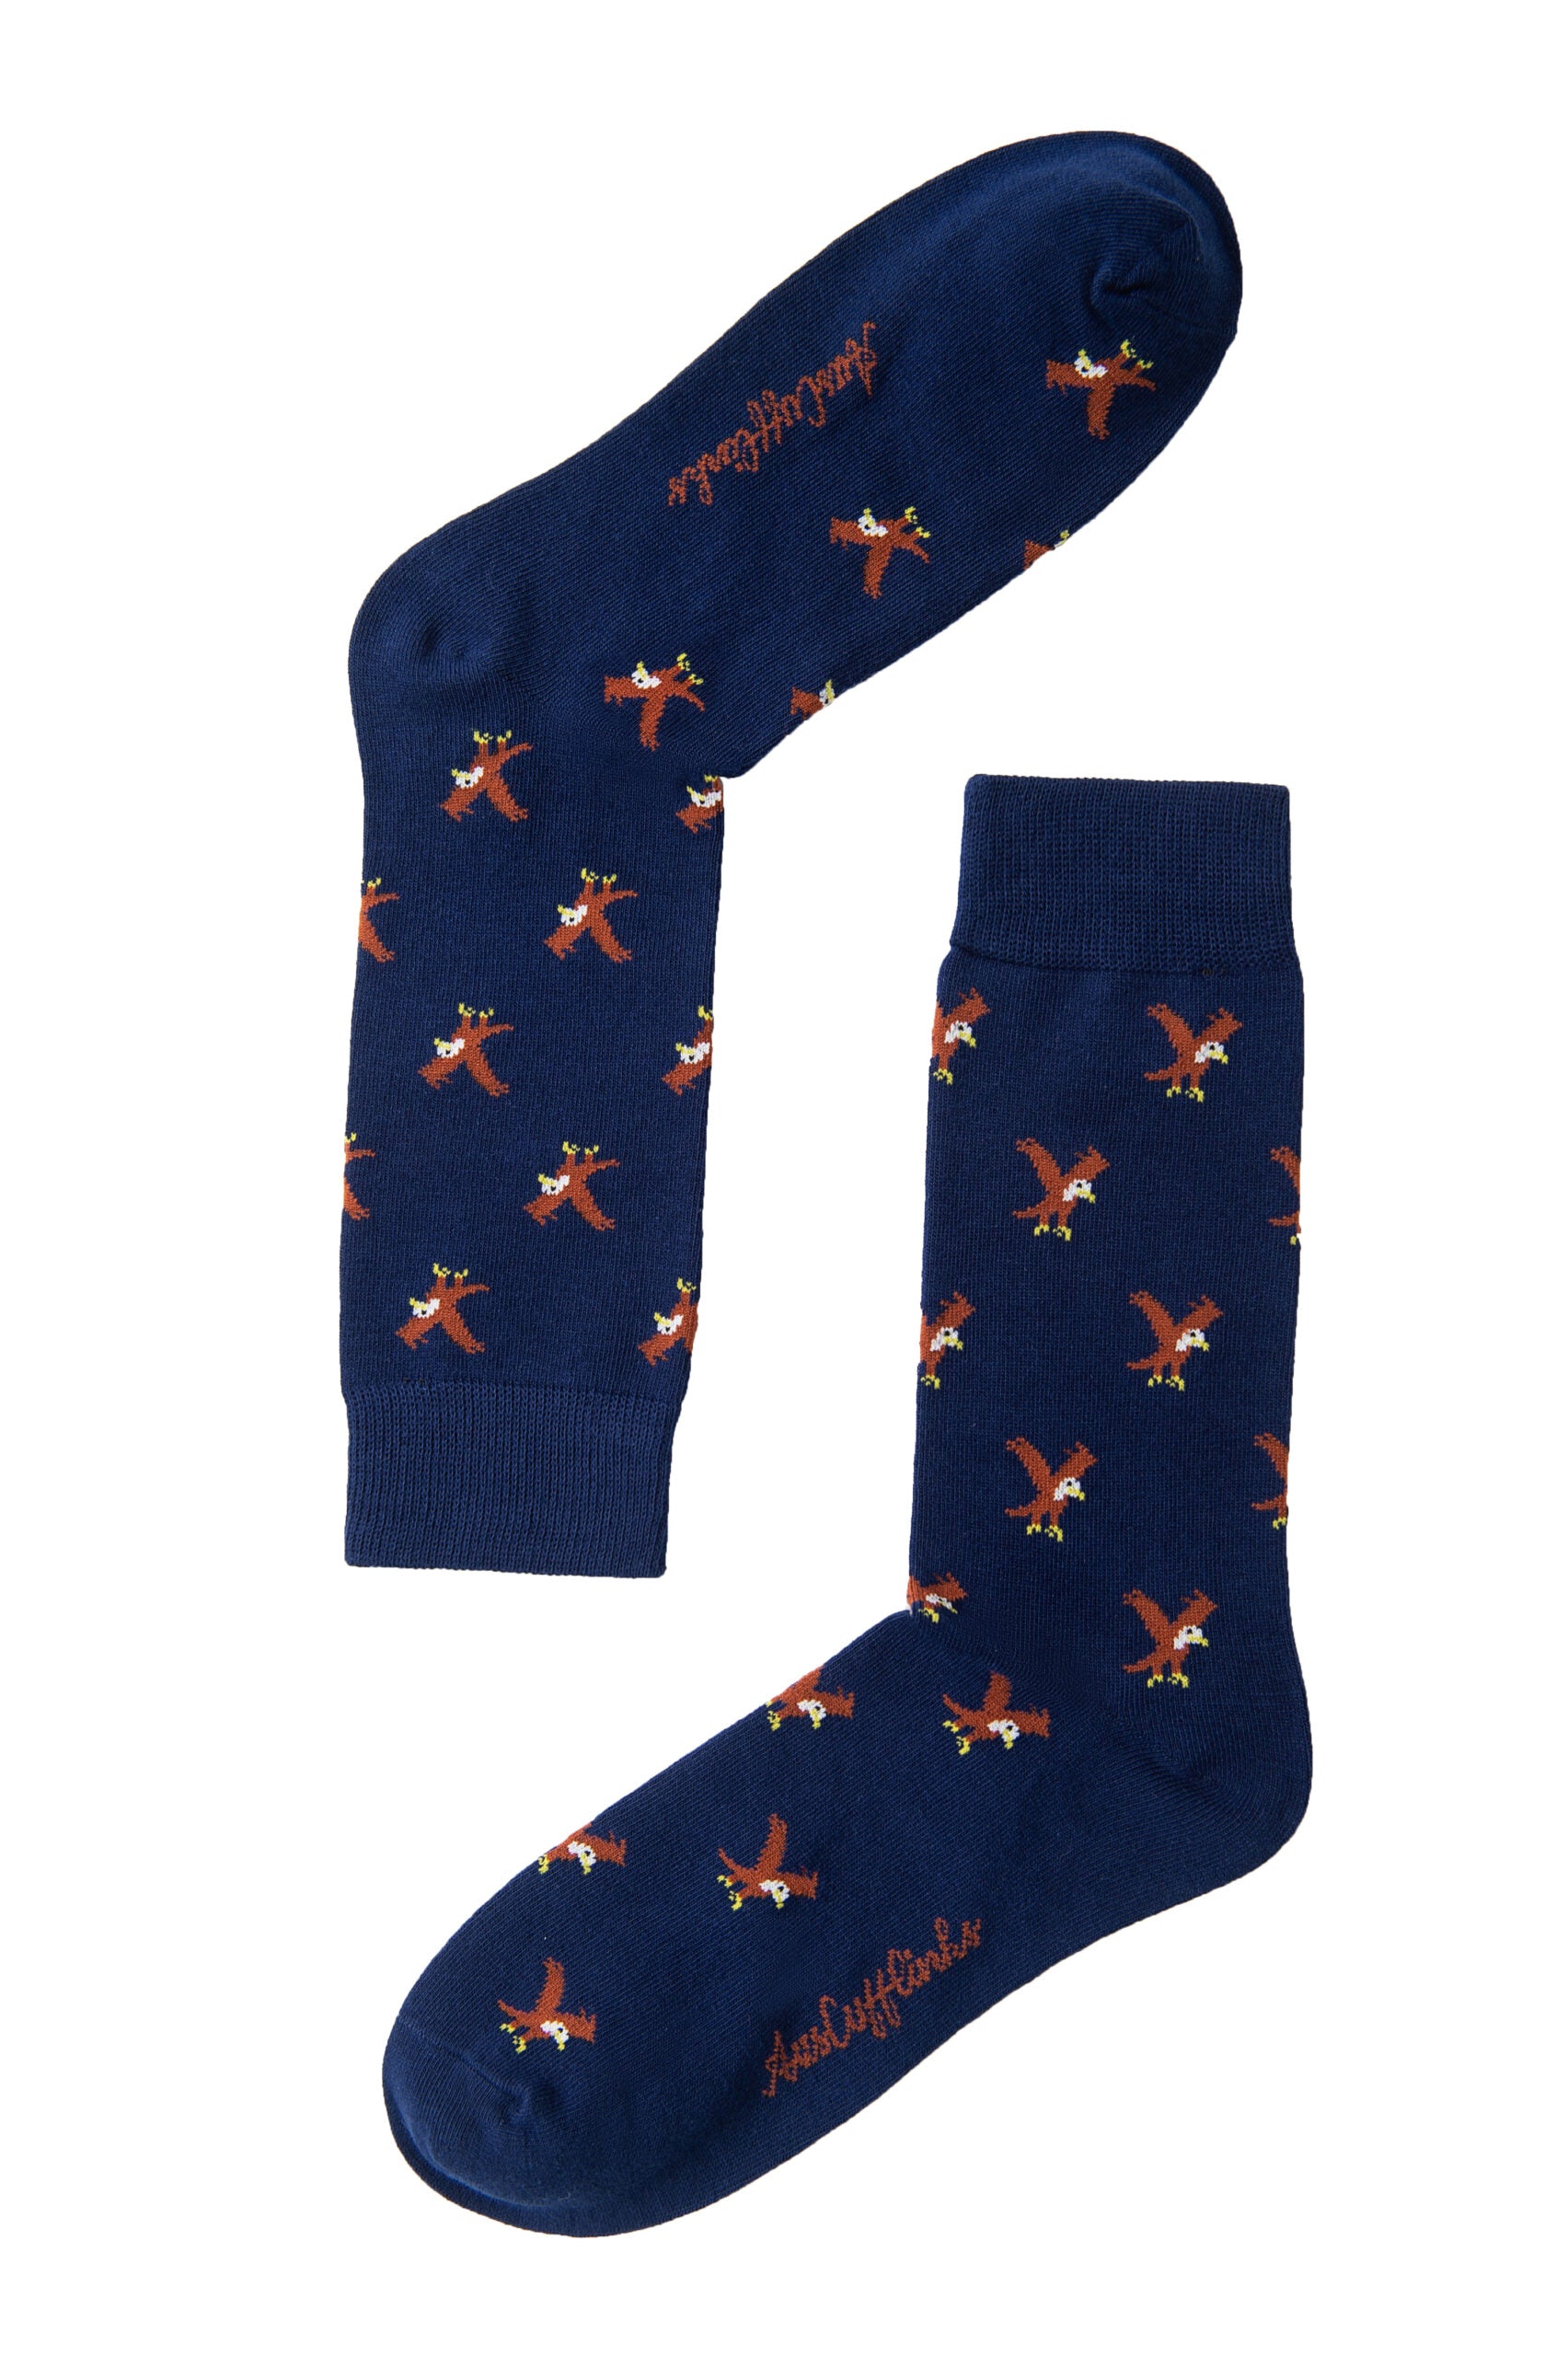 A pair of blue Eagle Socks with birds on them.